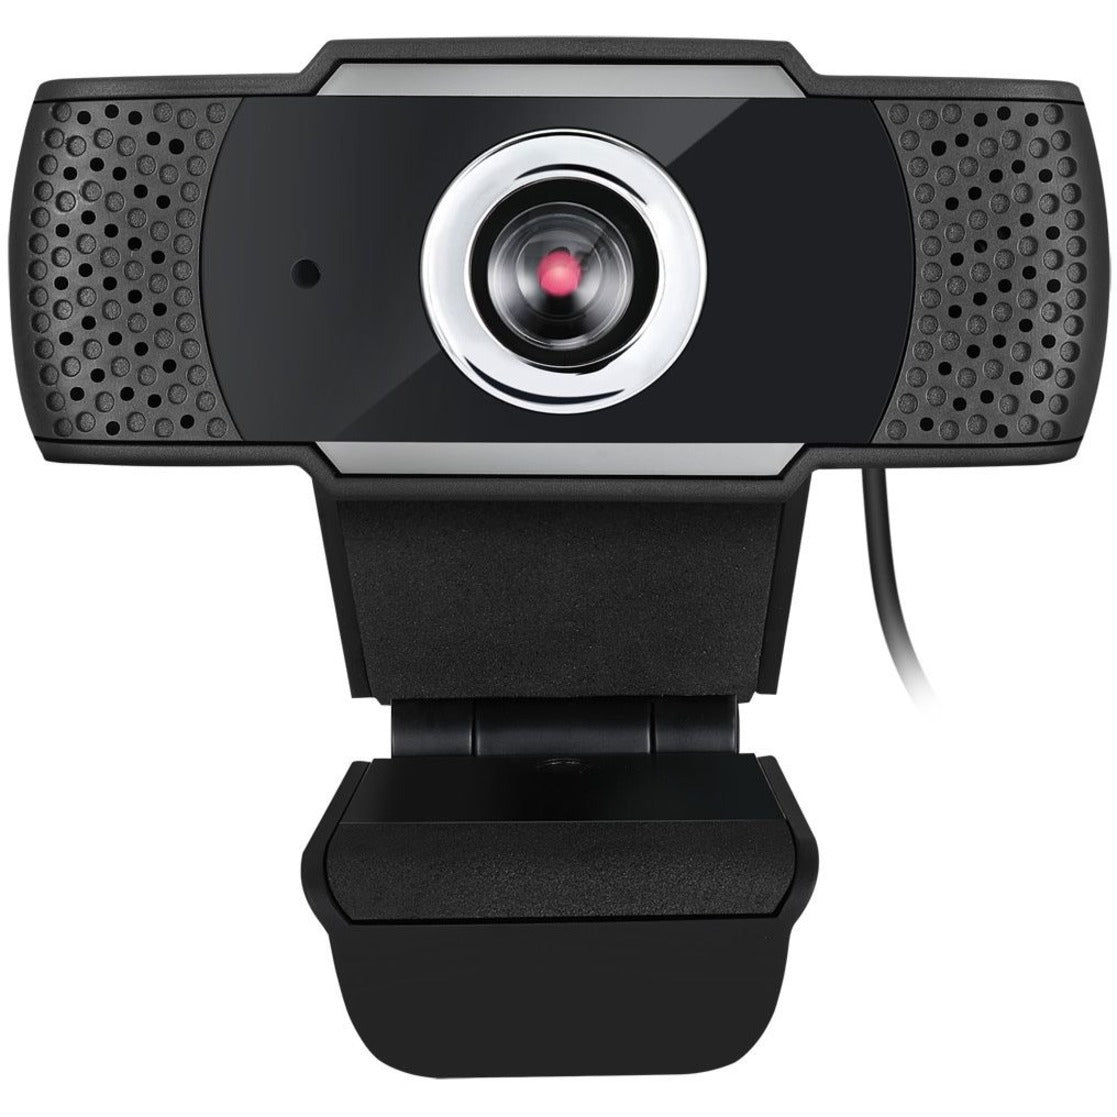 Adesso CYBERTRACKH4 1080P HD USB Webcam with Built-In Microphone, Auto Focus, 30fps